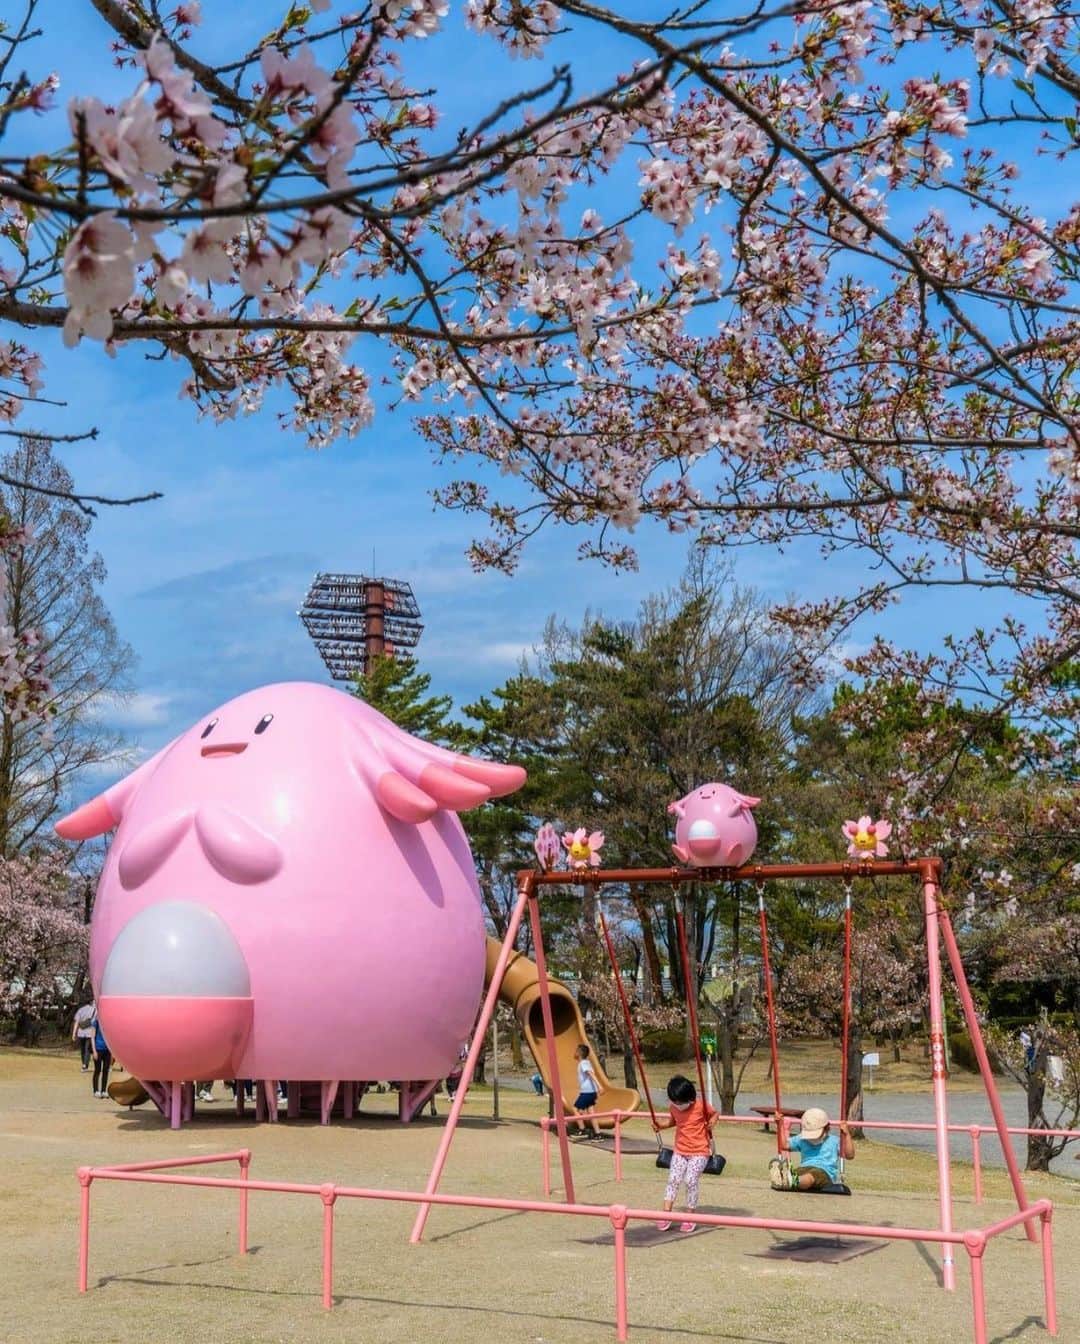 Rediscover Fukushimaのインスタグラム：「💗 Introducing Fukushima Prefecture's Support Pokémon… Chansey! 💗  👉In our latest blog post, you will discover:  🥚🌸Why Chansey is Fukushima’s Support Pokémon  🥚🌸Where to find Chansey’s Lucky Parks and Poké Lids (utility hole covers) to explore during your next visit to Fukushima  🥚🌸Where to buy the cutest Chansey merch in Fukushima  …and more! 🤩  The link is in our stories. 🥰  🔖Don’t forget to save this post for your next Pokémon searching trip to Fukushima prefecture!  💗 Have you ever visited any Chansey attractions in Fukushima? If so, what did you think? Please let us know in the comments! 💗  #visitfukushima #fukushima #fukushimaprefecture #japantravel #japantrip #tohokutrip #yanaizu #koriyama #kaiseizanpark #cute #japanese #pokemontrainer #pokemoninjapan #pokemon #Pokémon #chansey #pikachu #chanseypark #chanseyparks #pokemoninstagram #pokelids #pokemoncollector #pokemontrip #福島県 #ラッキー #ラッキー公園 #ポケモン」